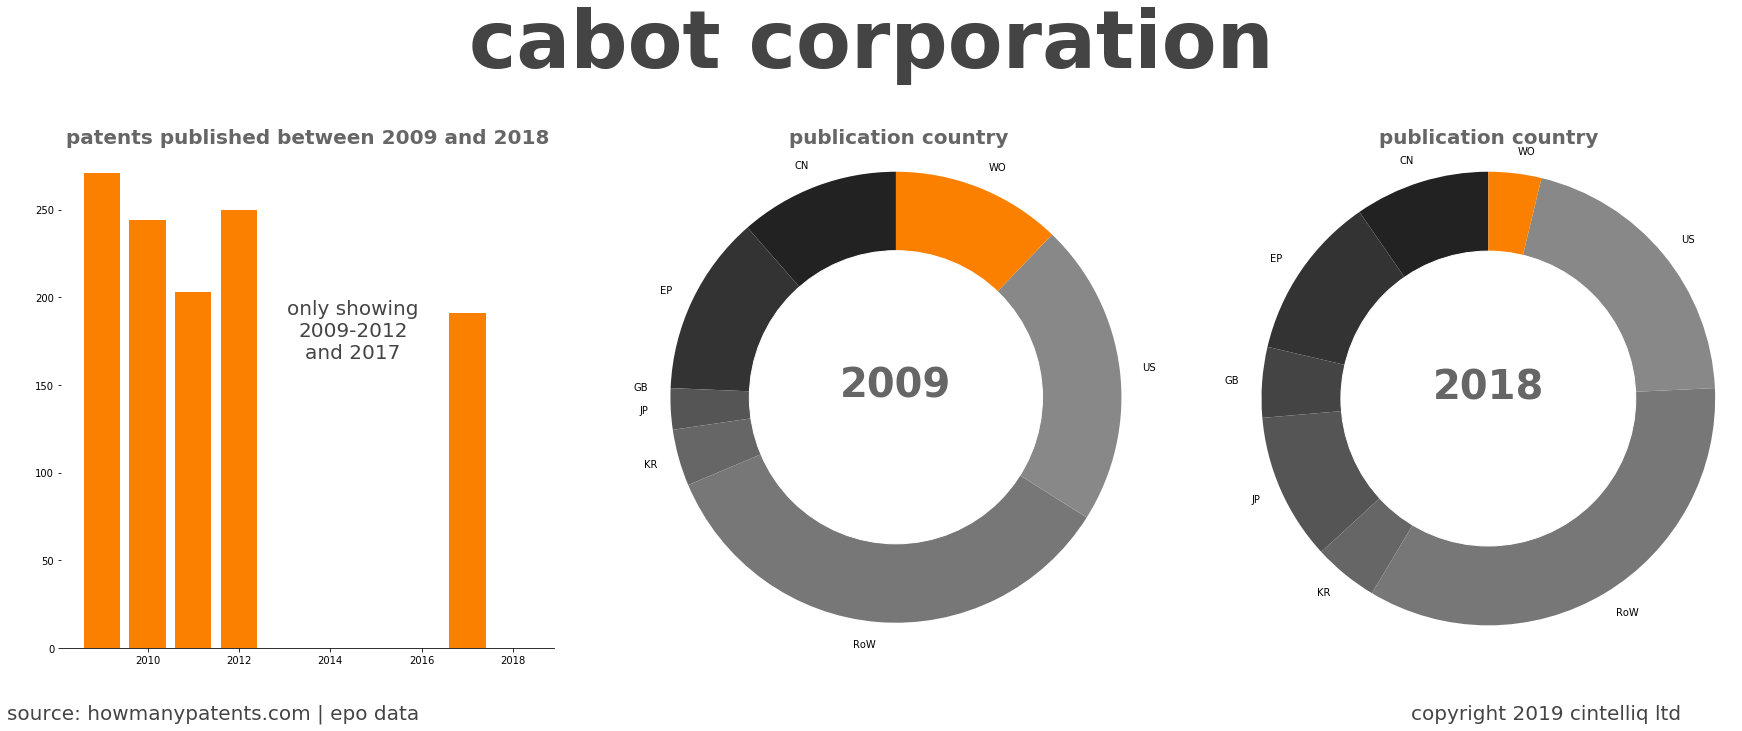 summary of patents for Cabot Corporation